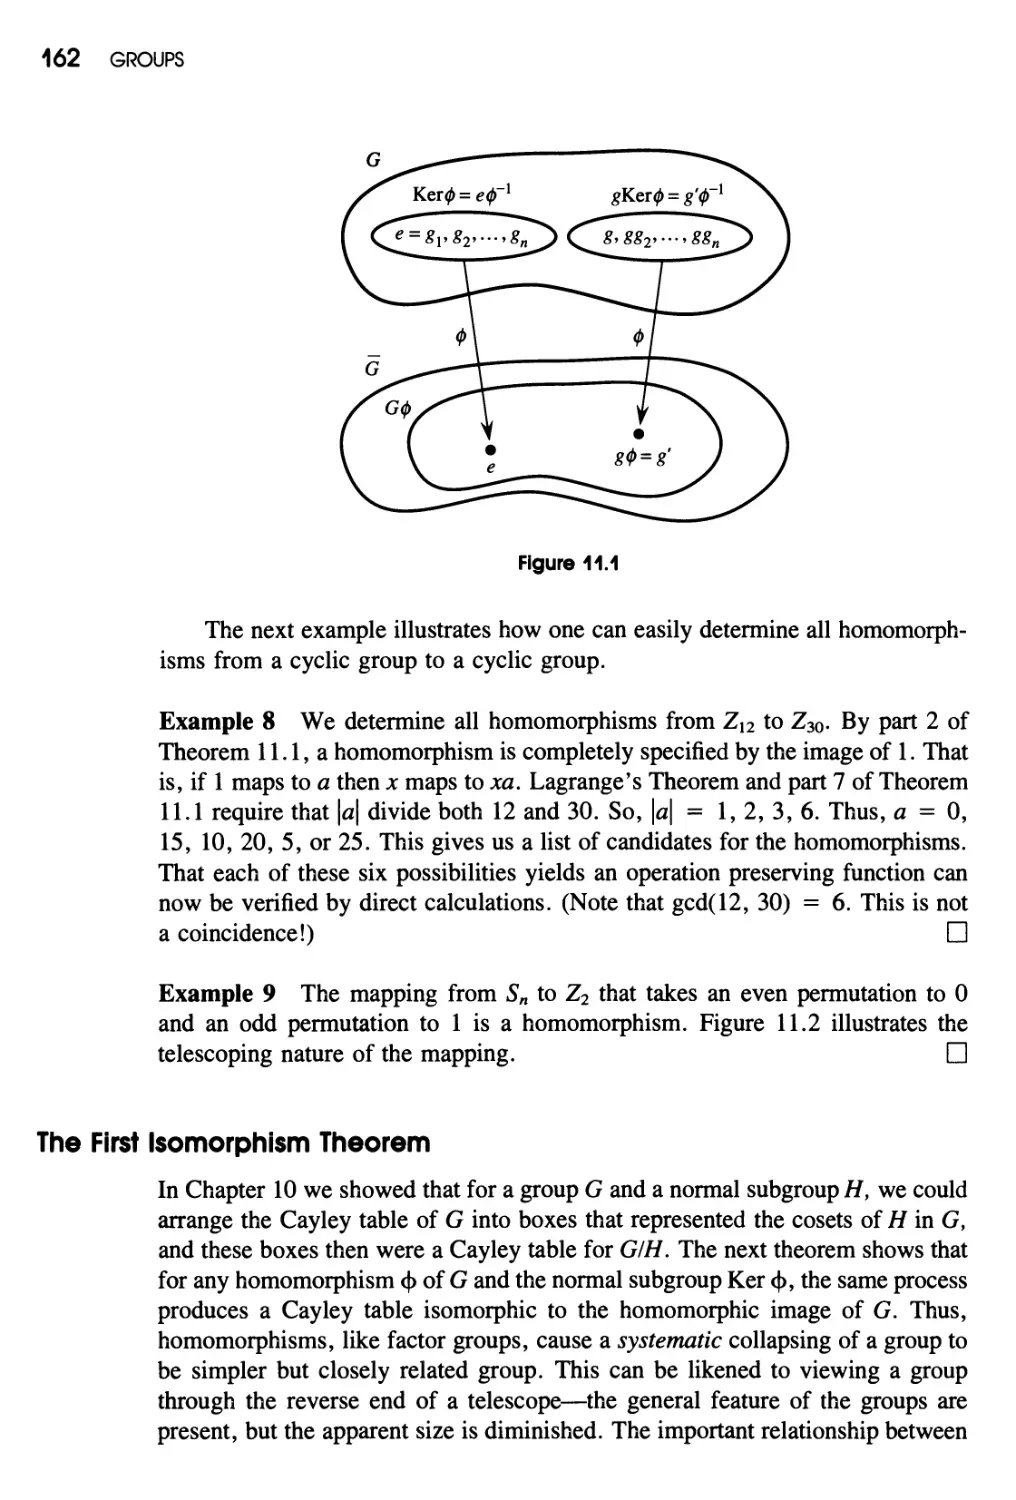 The First Isomorphism Theorem